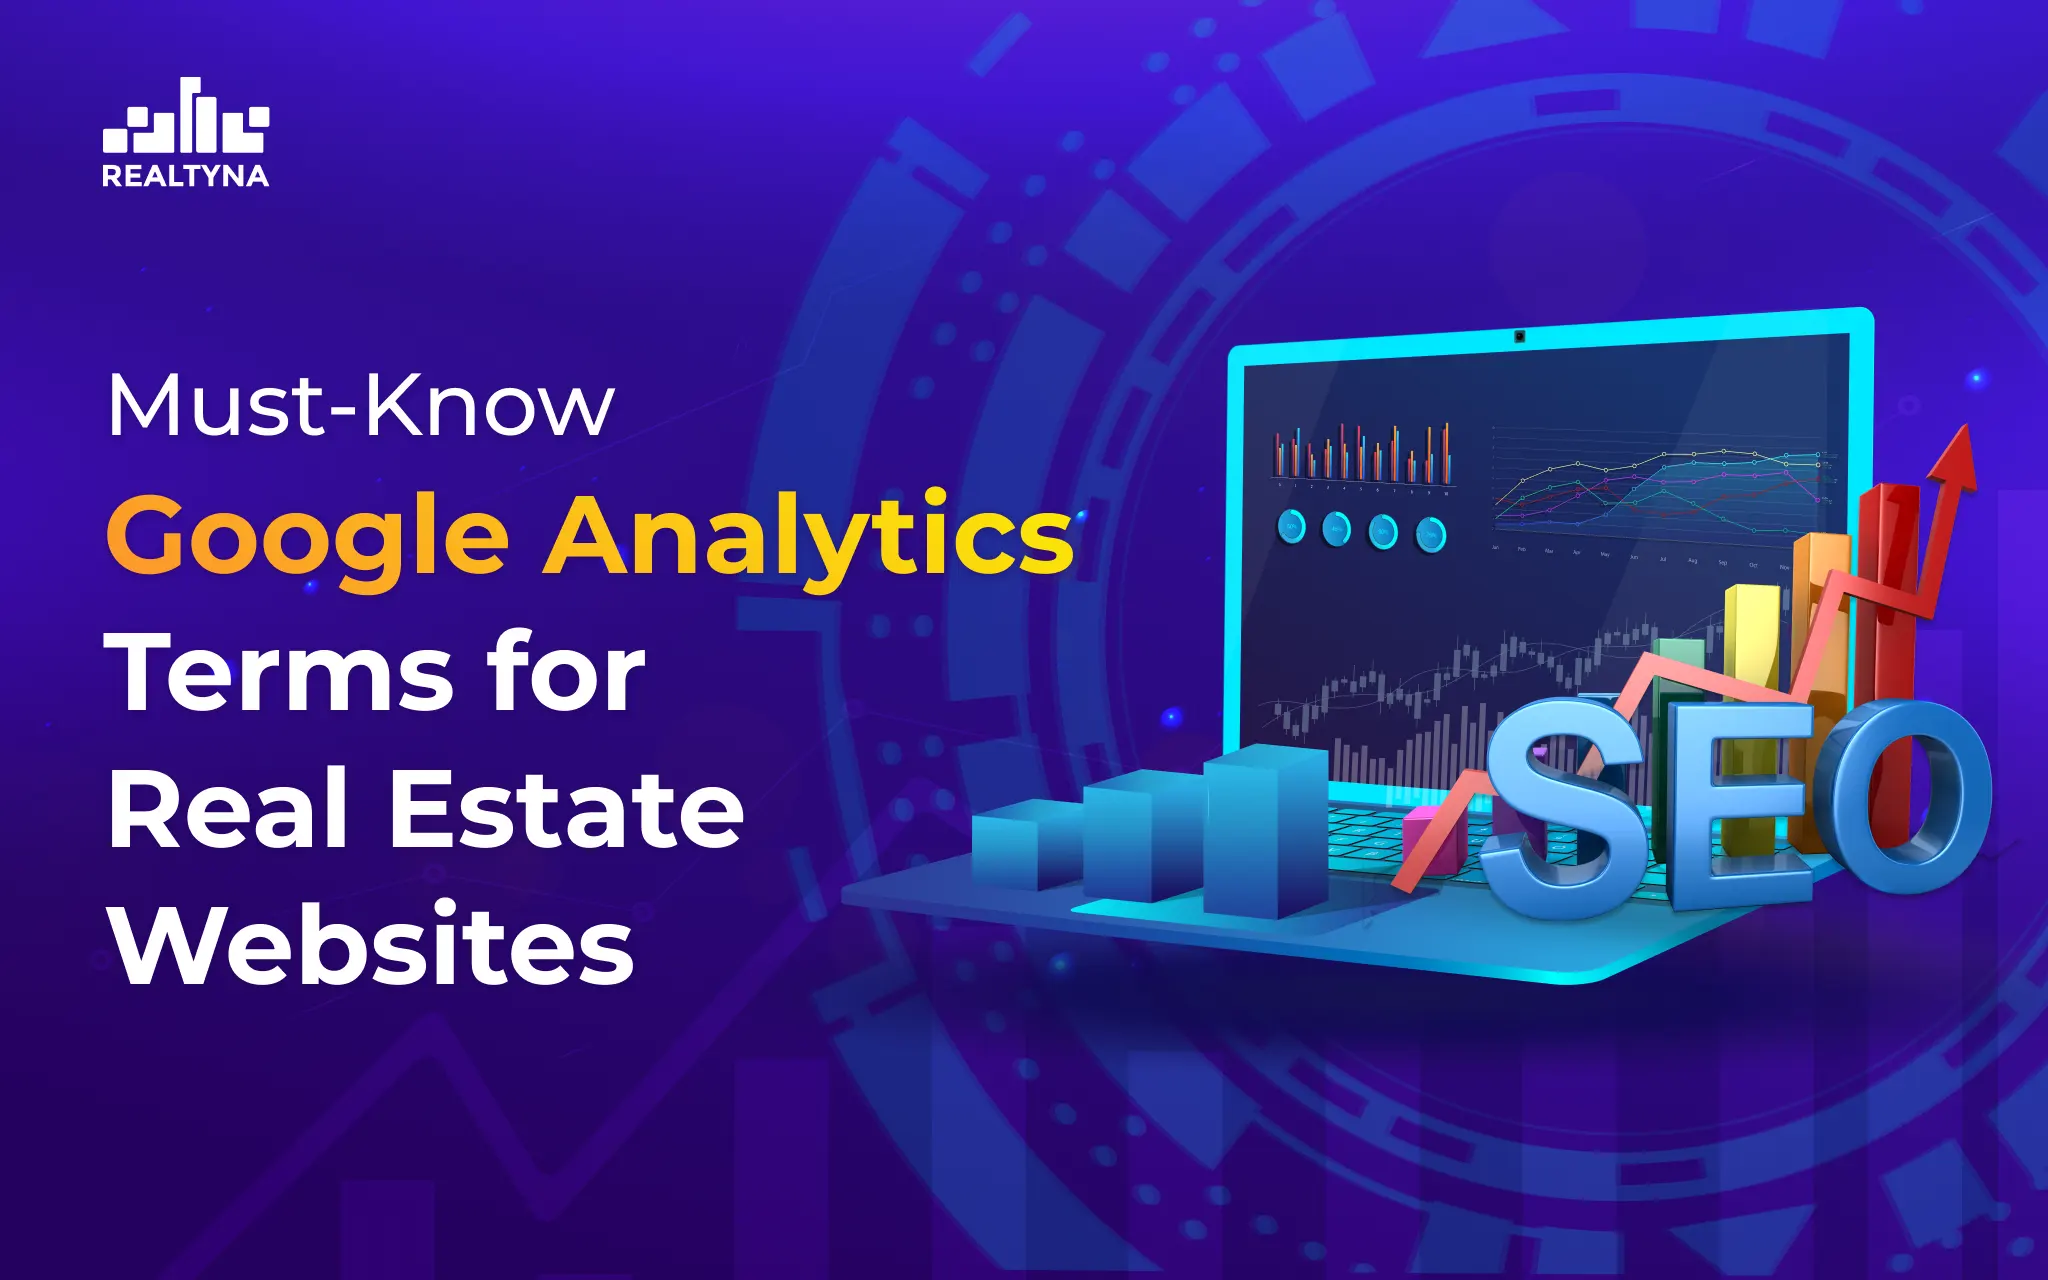 Must-Know Google Analytics Terms for Real Estate Websites